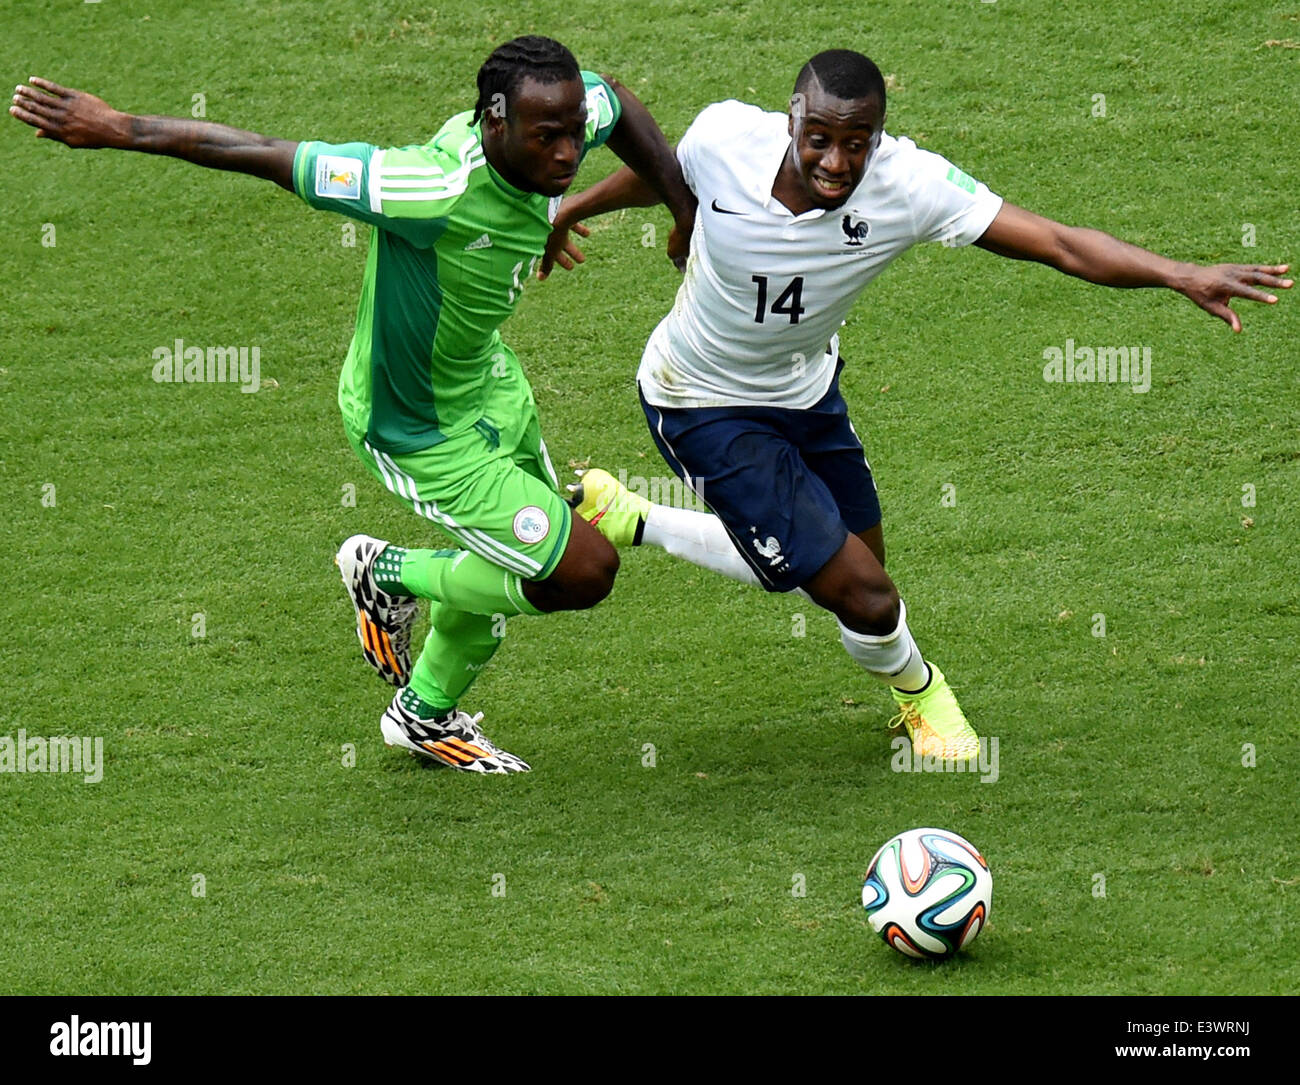 Brasilia, Brazil. 30th June, 2014. France's Blaise Matuidi (R) vies with Nigeria's Victor Moses during a Round of 16 match between France and Nigeria of 2014 FIFA World Cup at the Estadio Nacional Stadium in Brasilia, Brazil, on June 30, 2014. Credit:  Liu Dawei/Xinhua/Alamy Live News Stock Photo